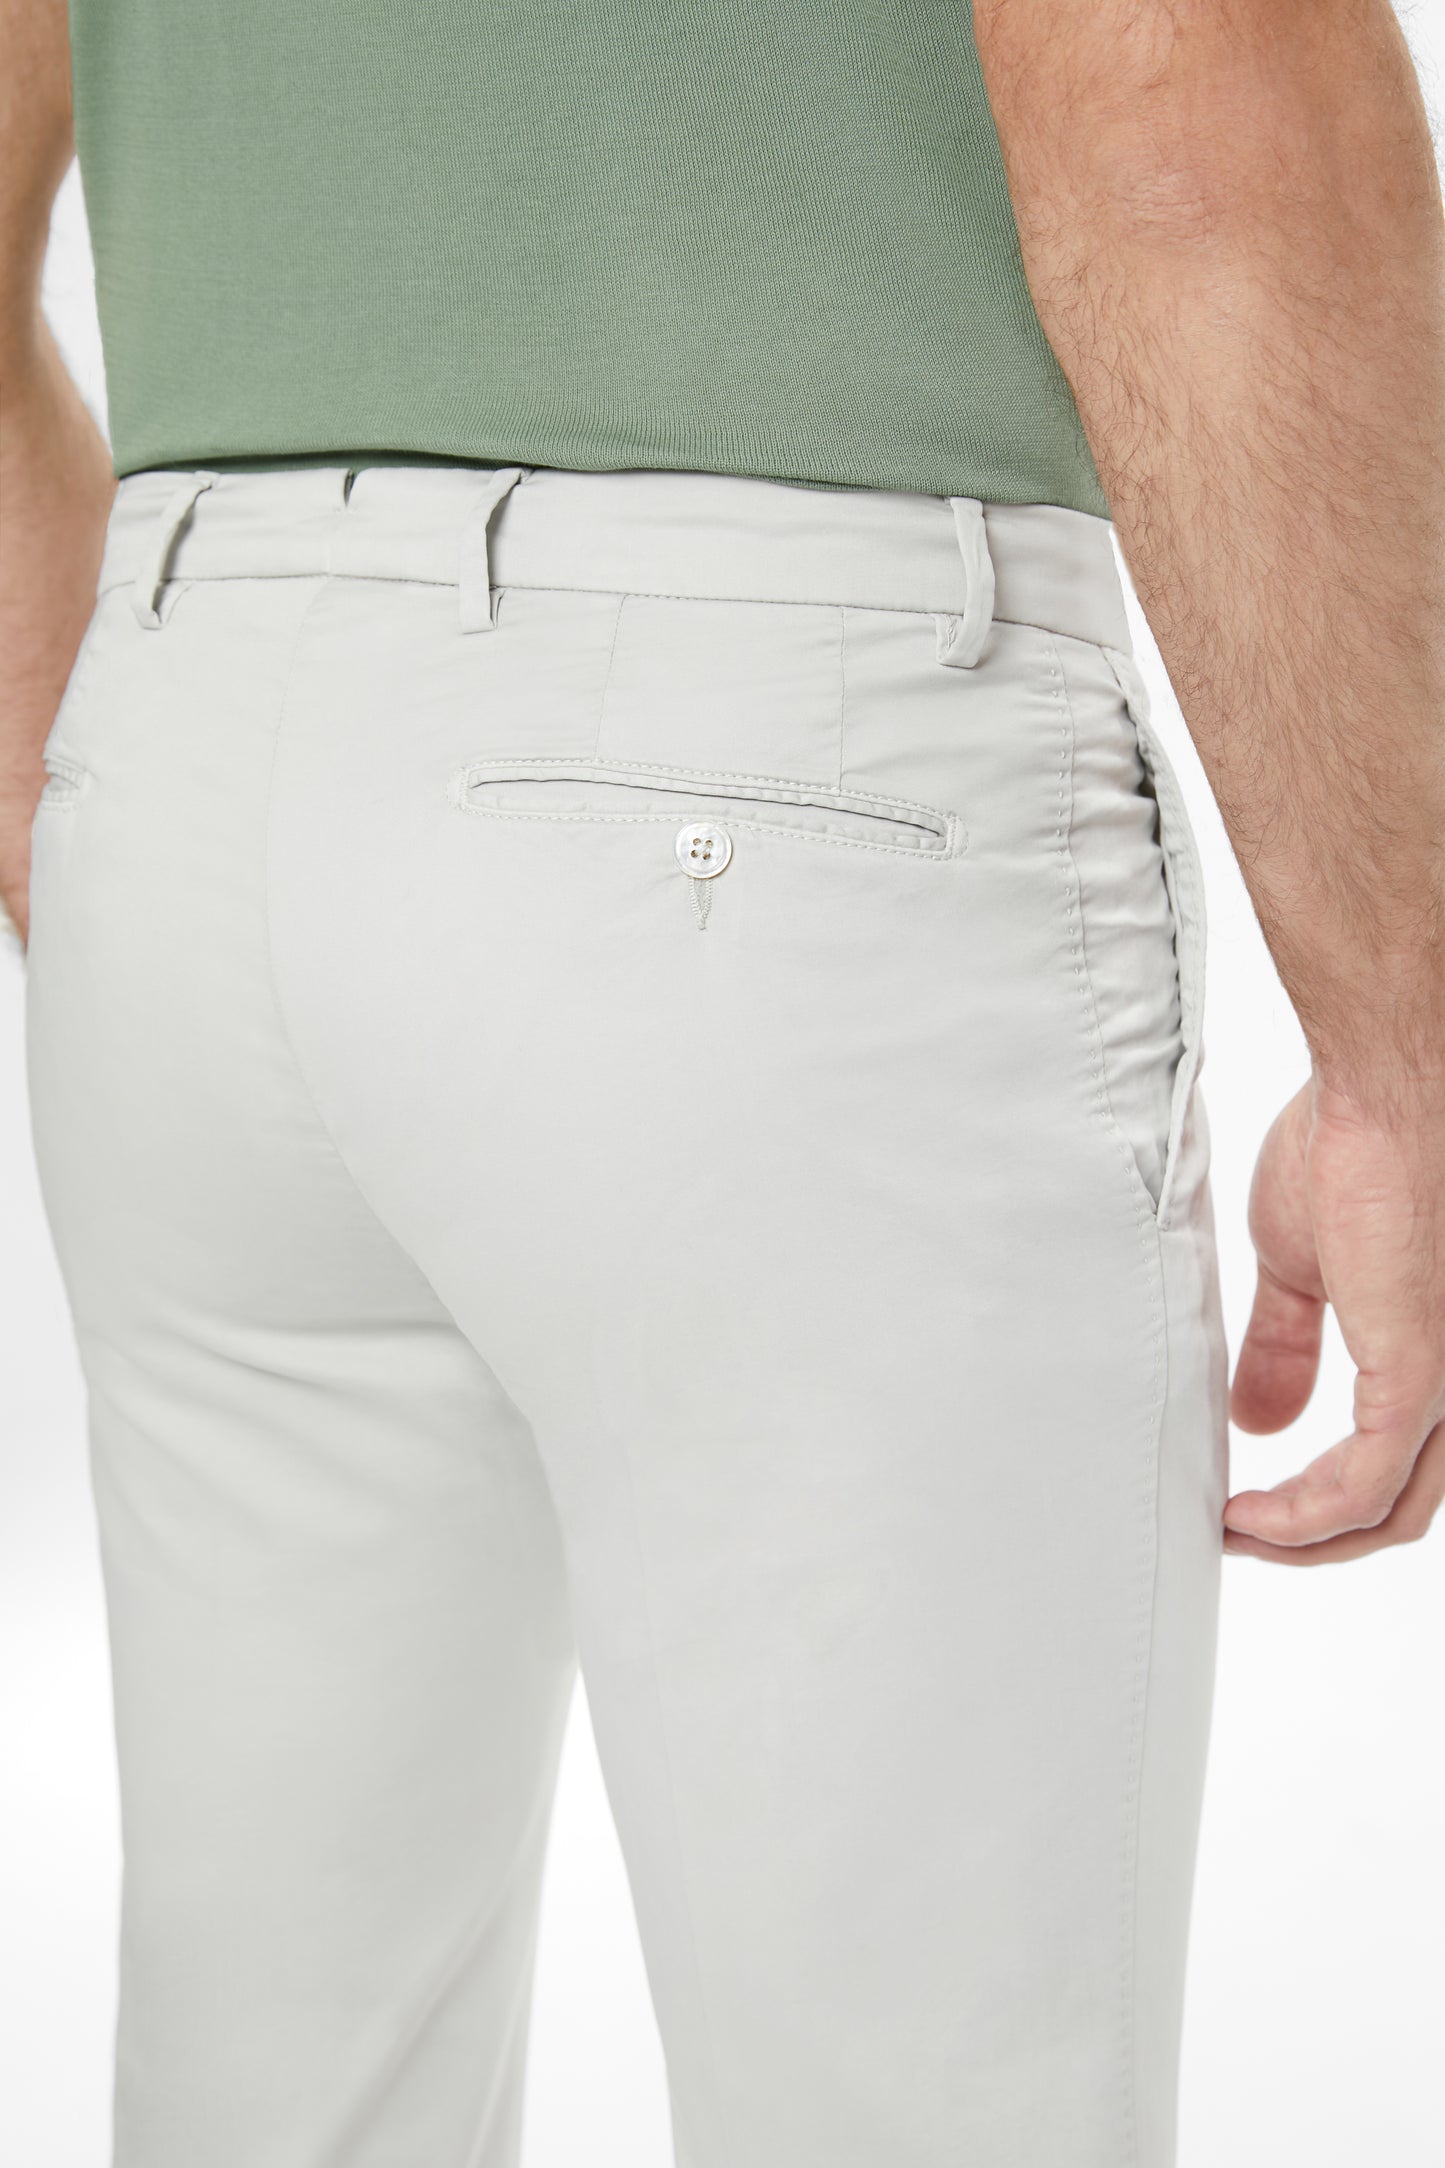 Beige CHINOS Trousers